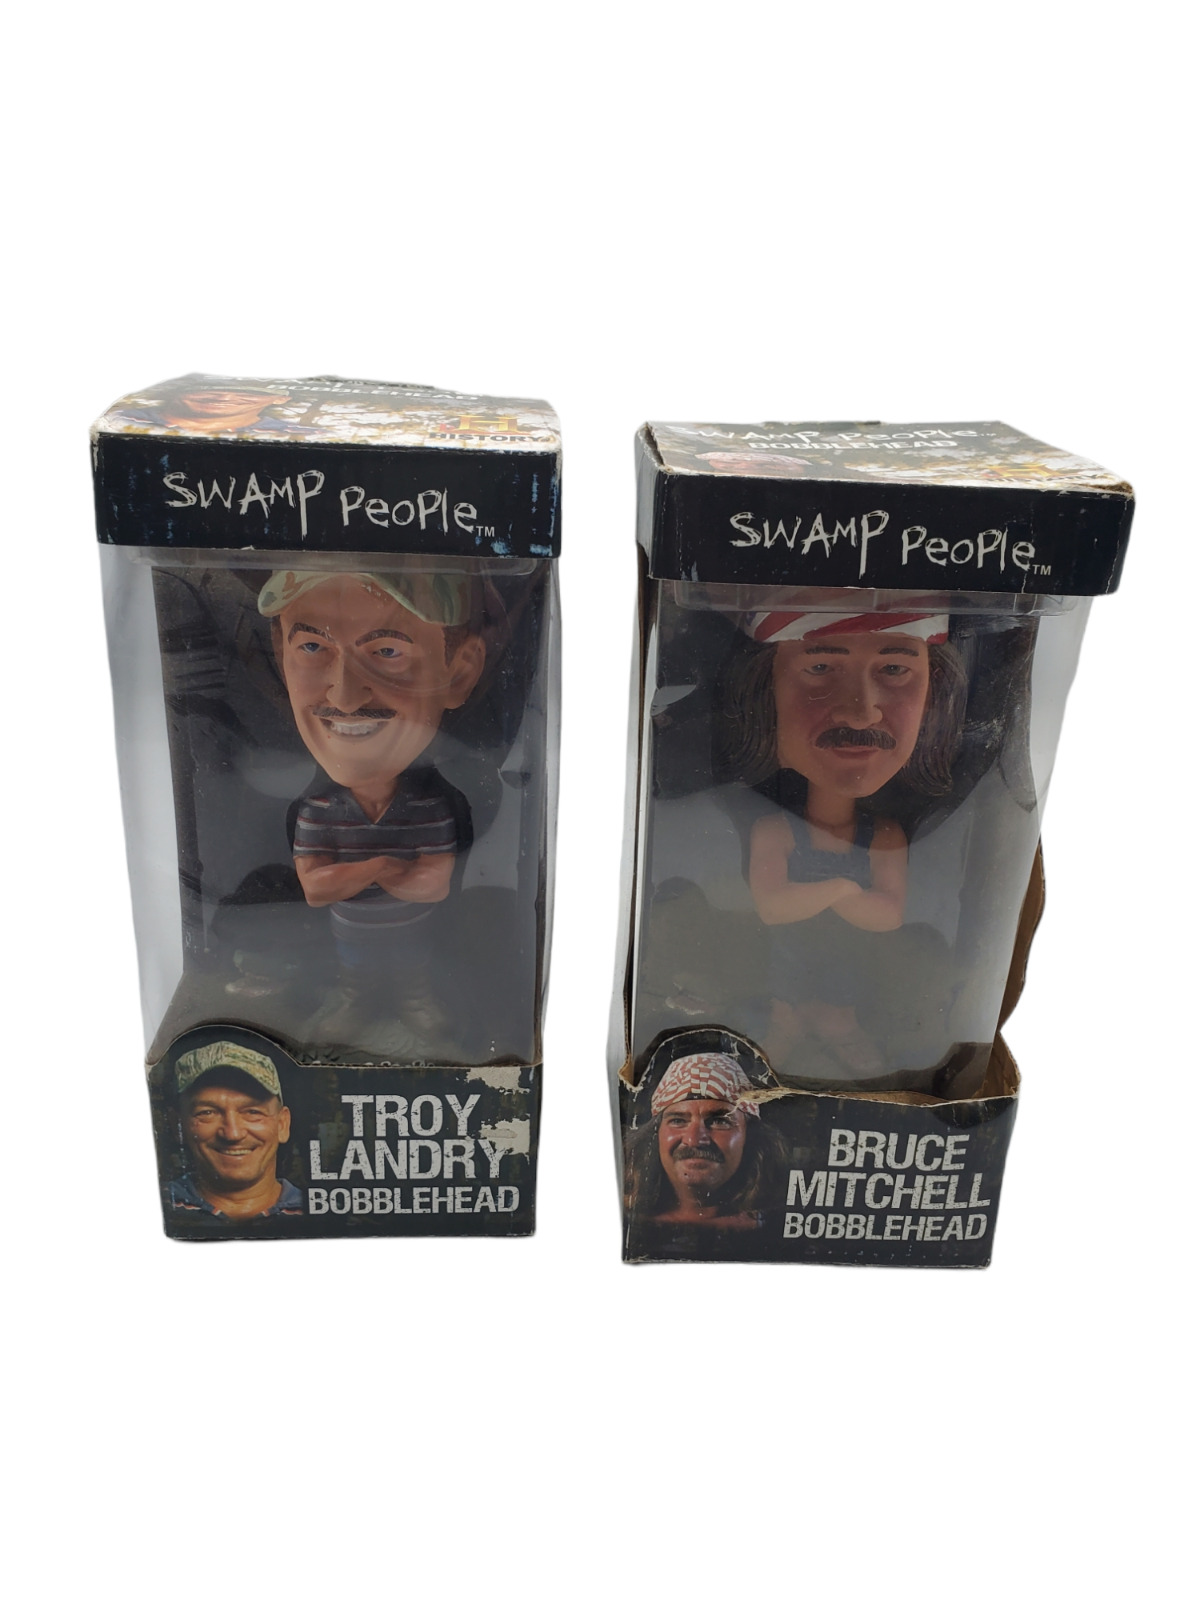 Rare Swamp People Bobblehead Set 2012 Troy Landry  and Bruce Mitchell 2 PC